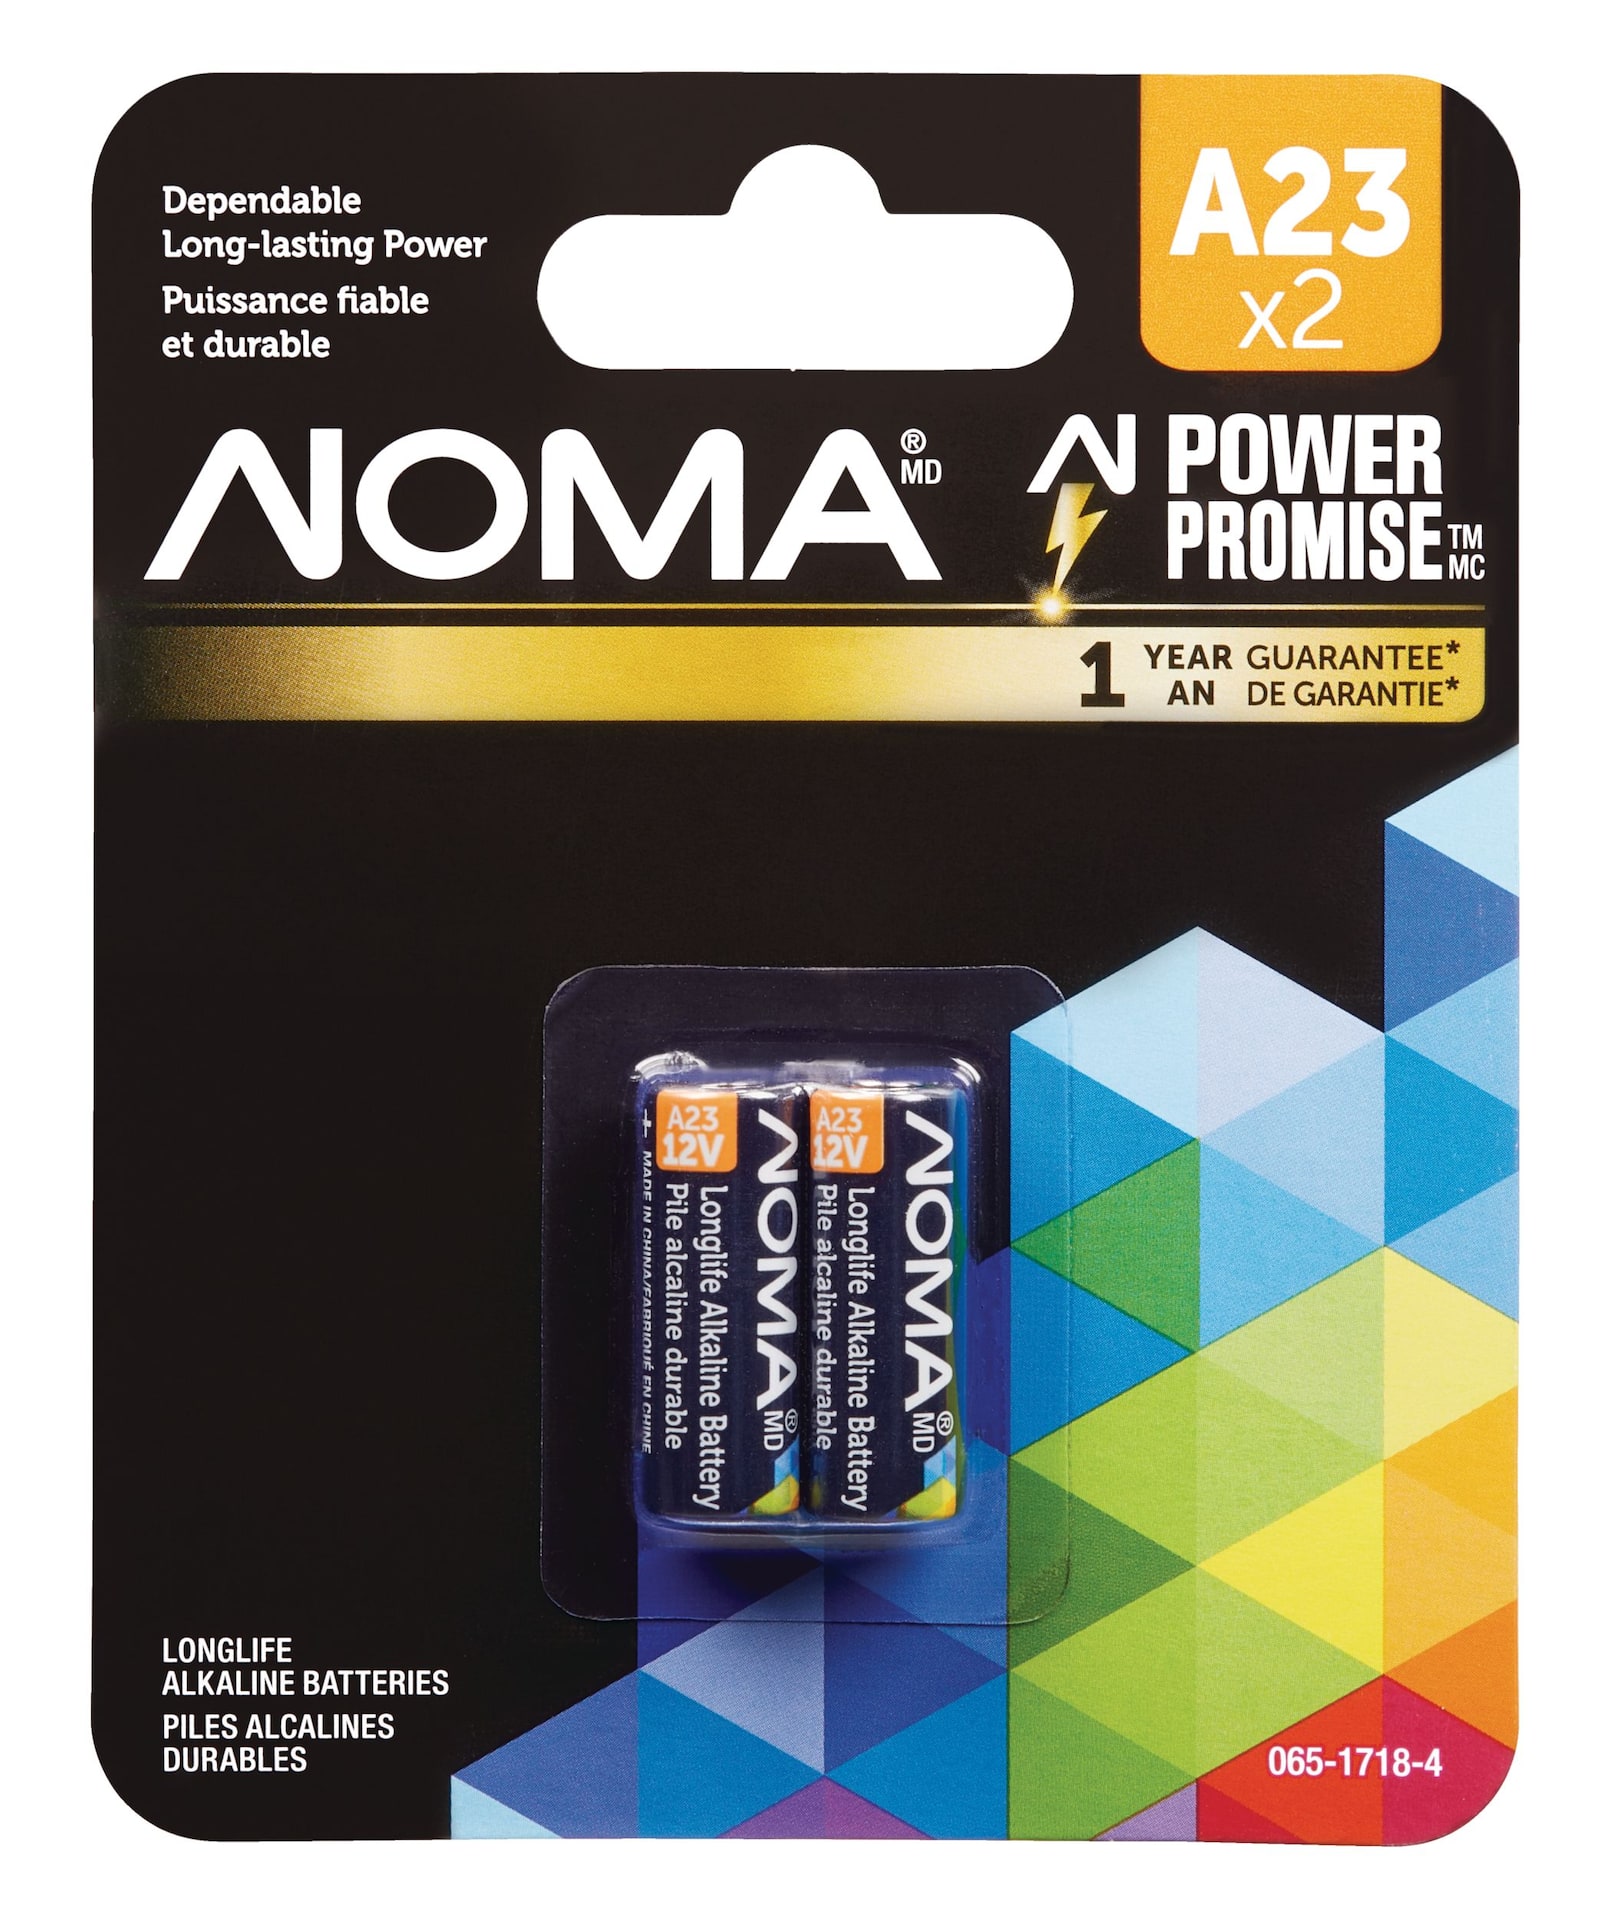 https://media-www.canadiantire.ca/product/fixing/hardware/household-batteries/0651718/noma-a23-watch-battery-2-pk-1142c965-cde9-4d3a-bc14-2effdddf8afb-jpgrendition.jpg